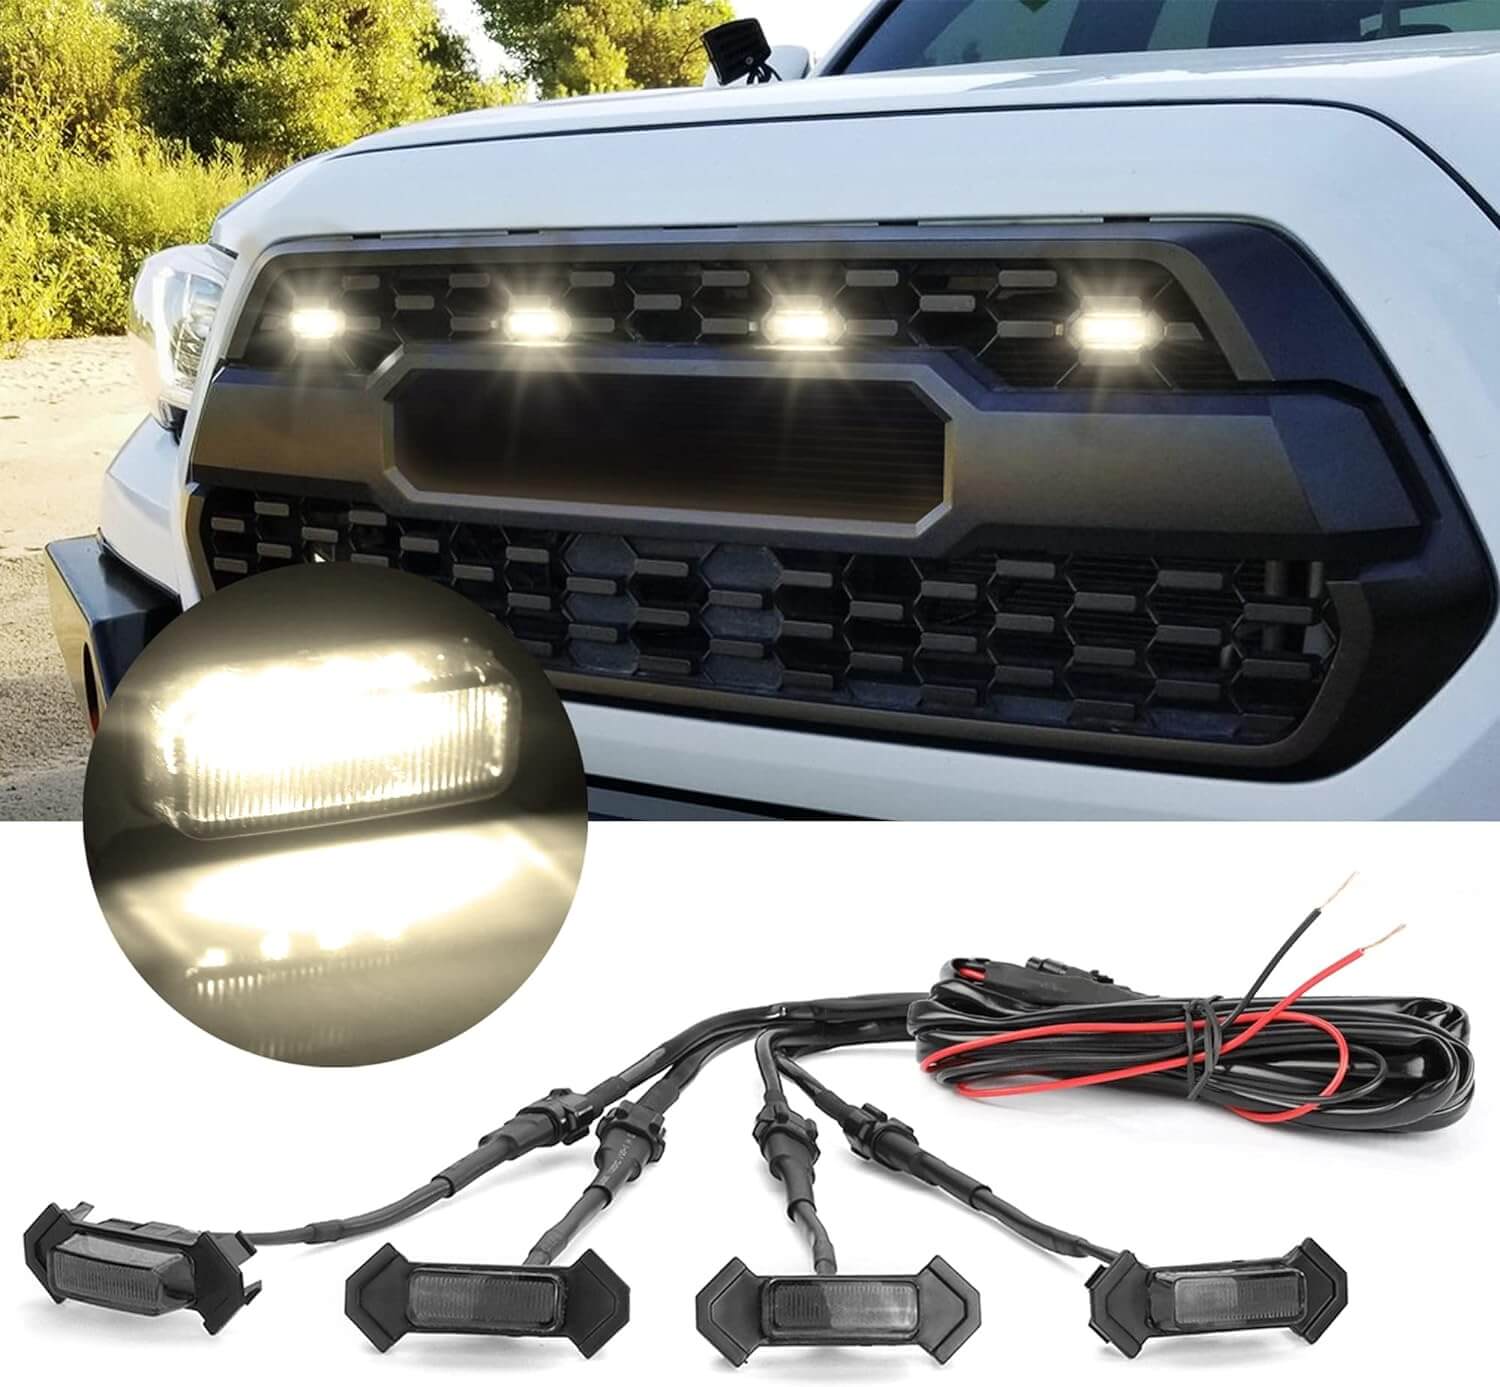 Oxilam Motor Vehicle Lighting OXILAM LED Grille Lights with Harness & Fuse for Toyota Tacoma TRD PRO Front Grille 2016 2017 2018 2019 (4PCS, Black Shell with Warm White Light)